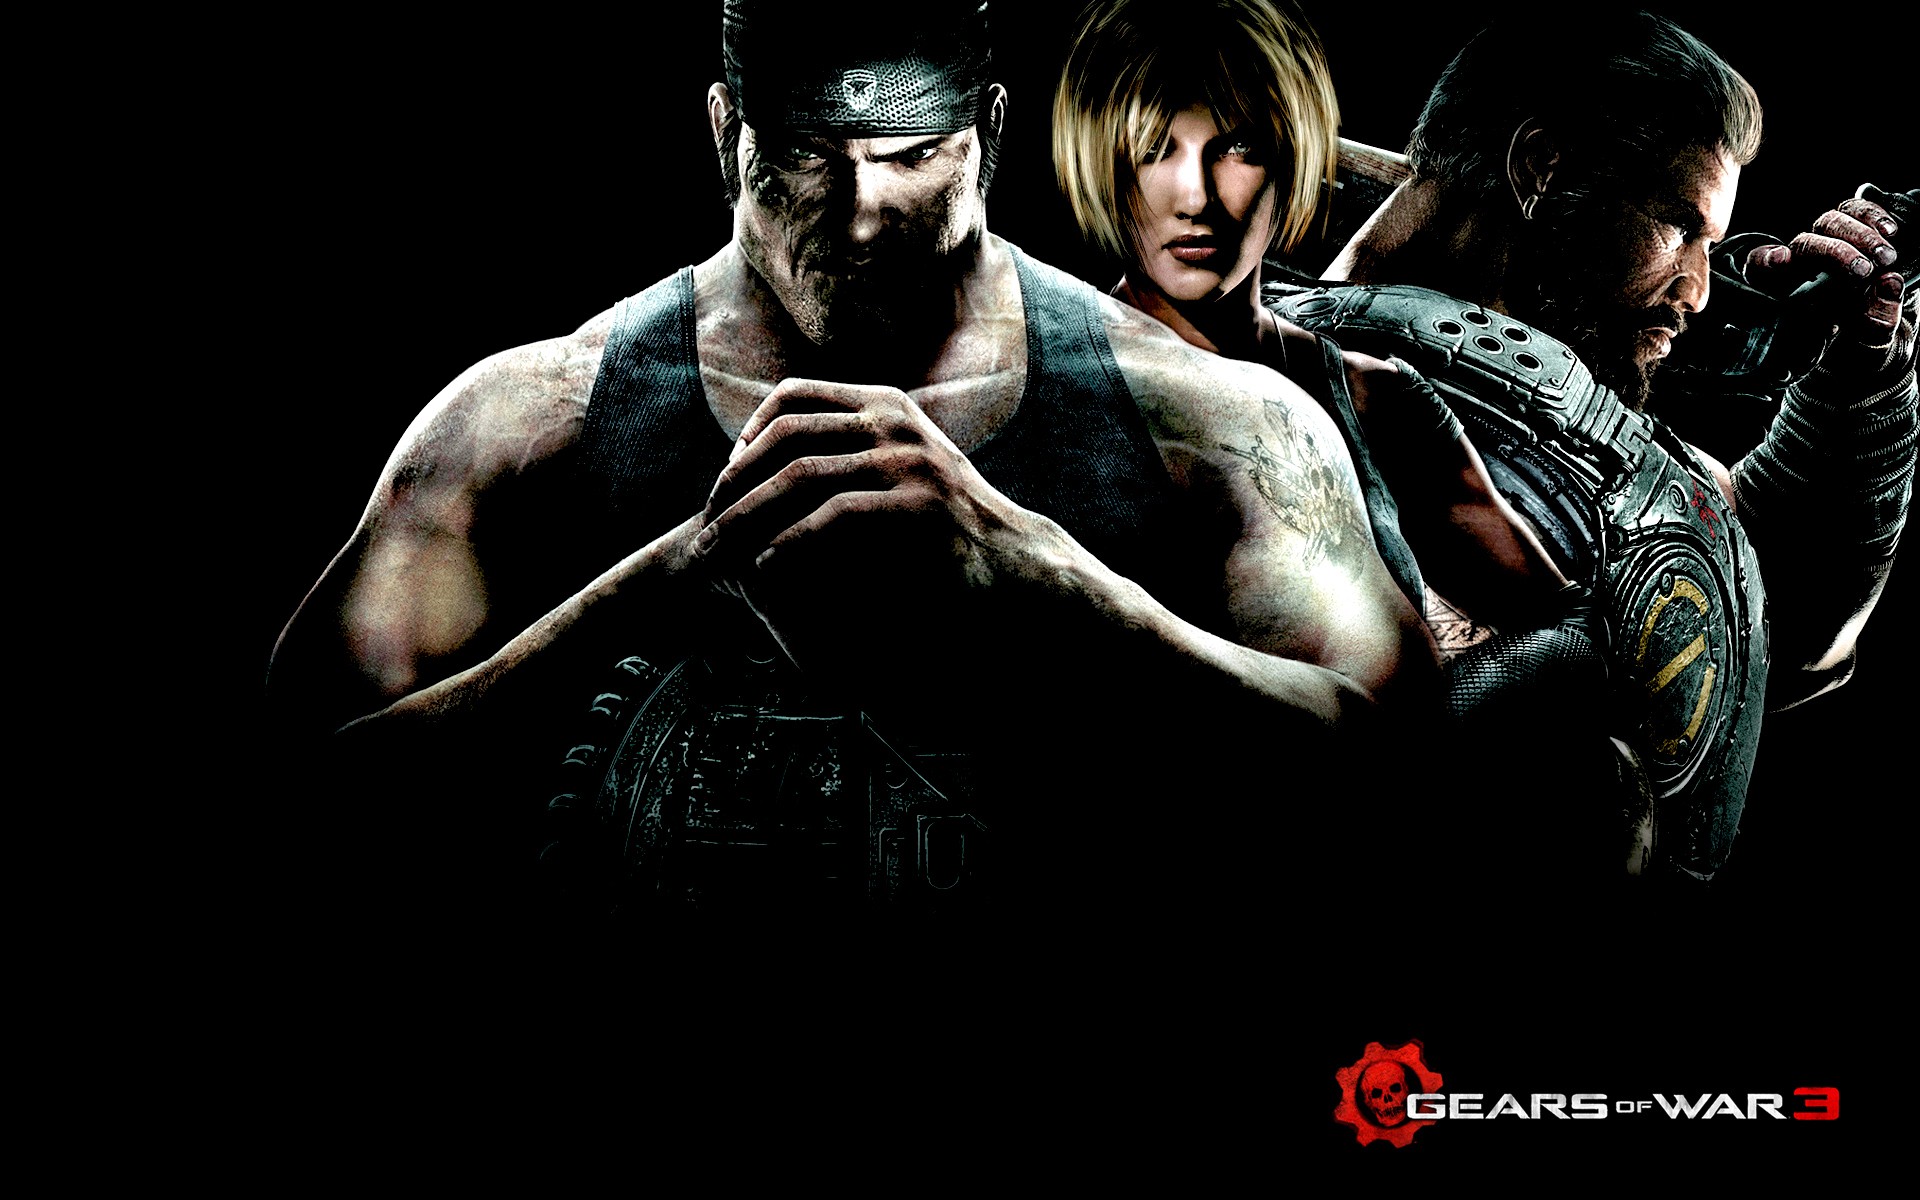 General 1920x1200 Gears of War 3 video games video game men video game girls video game art simple background black background muscles